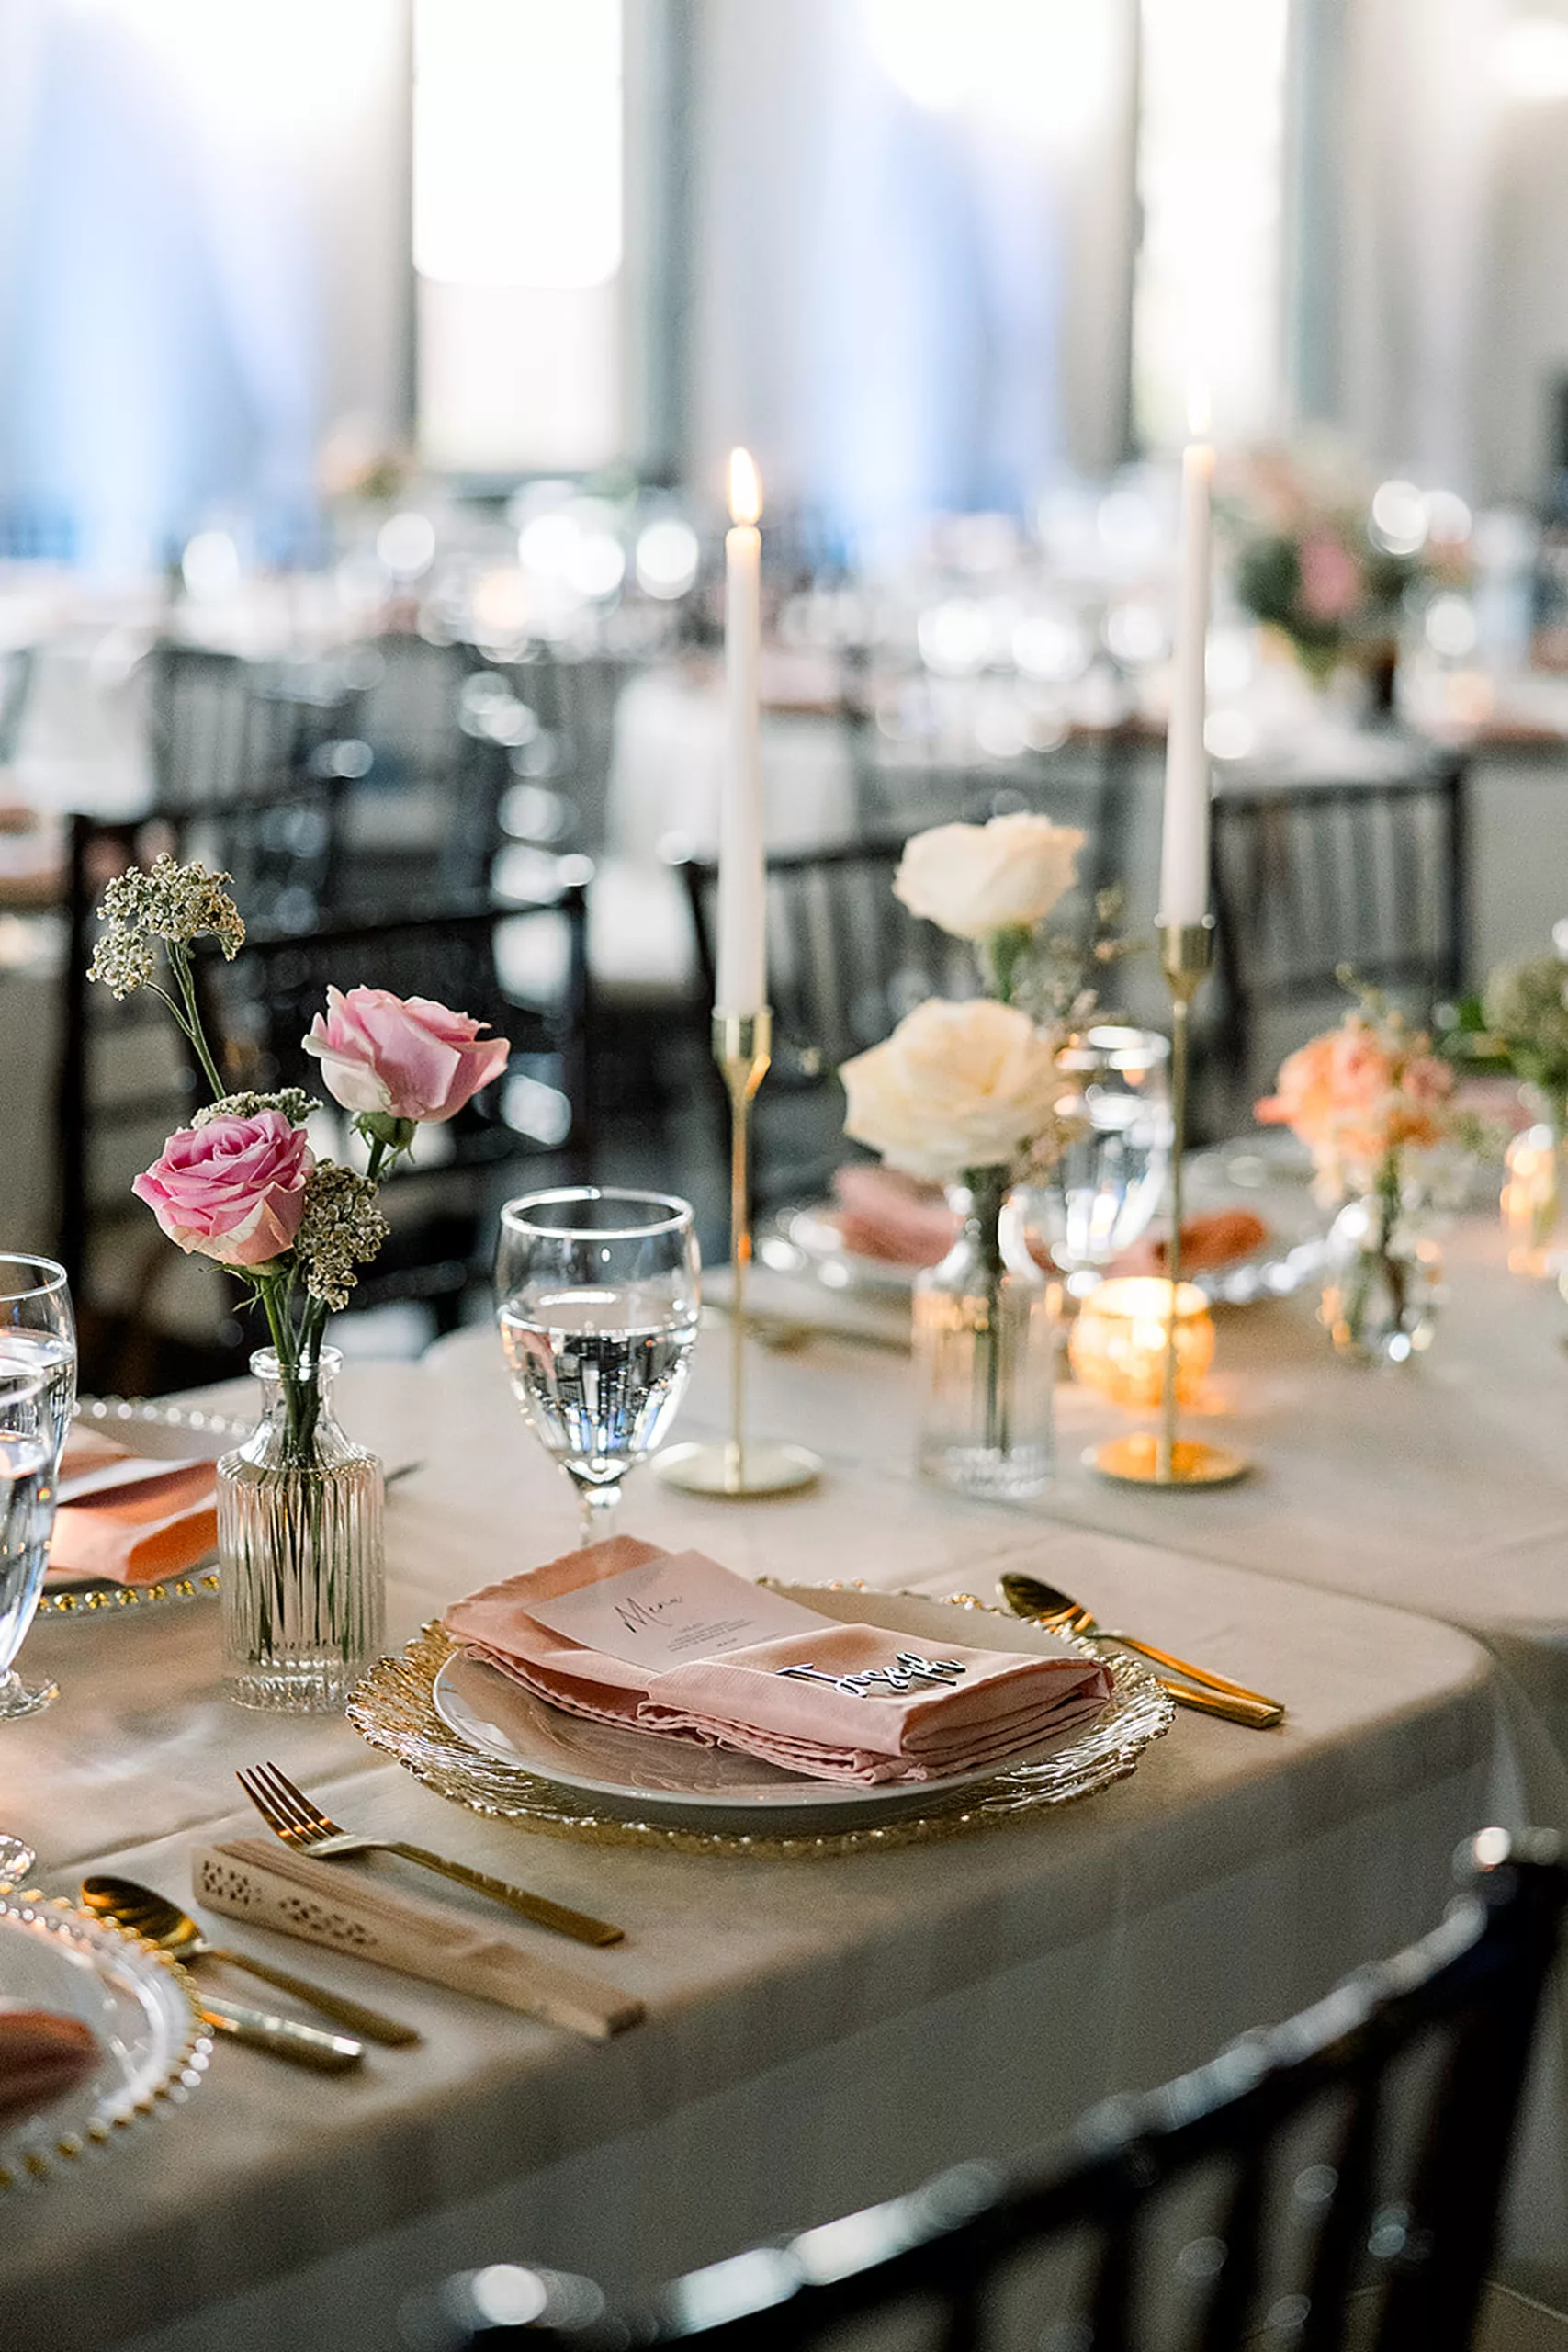 Details of a wedding reception table set up with pink linens and roses and gold silverware at the White Oaks Vineyard wedding venue